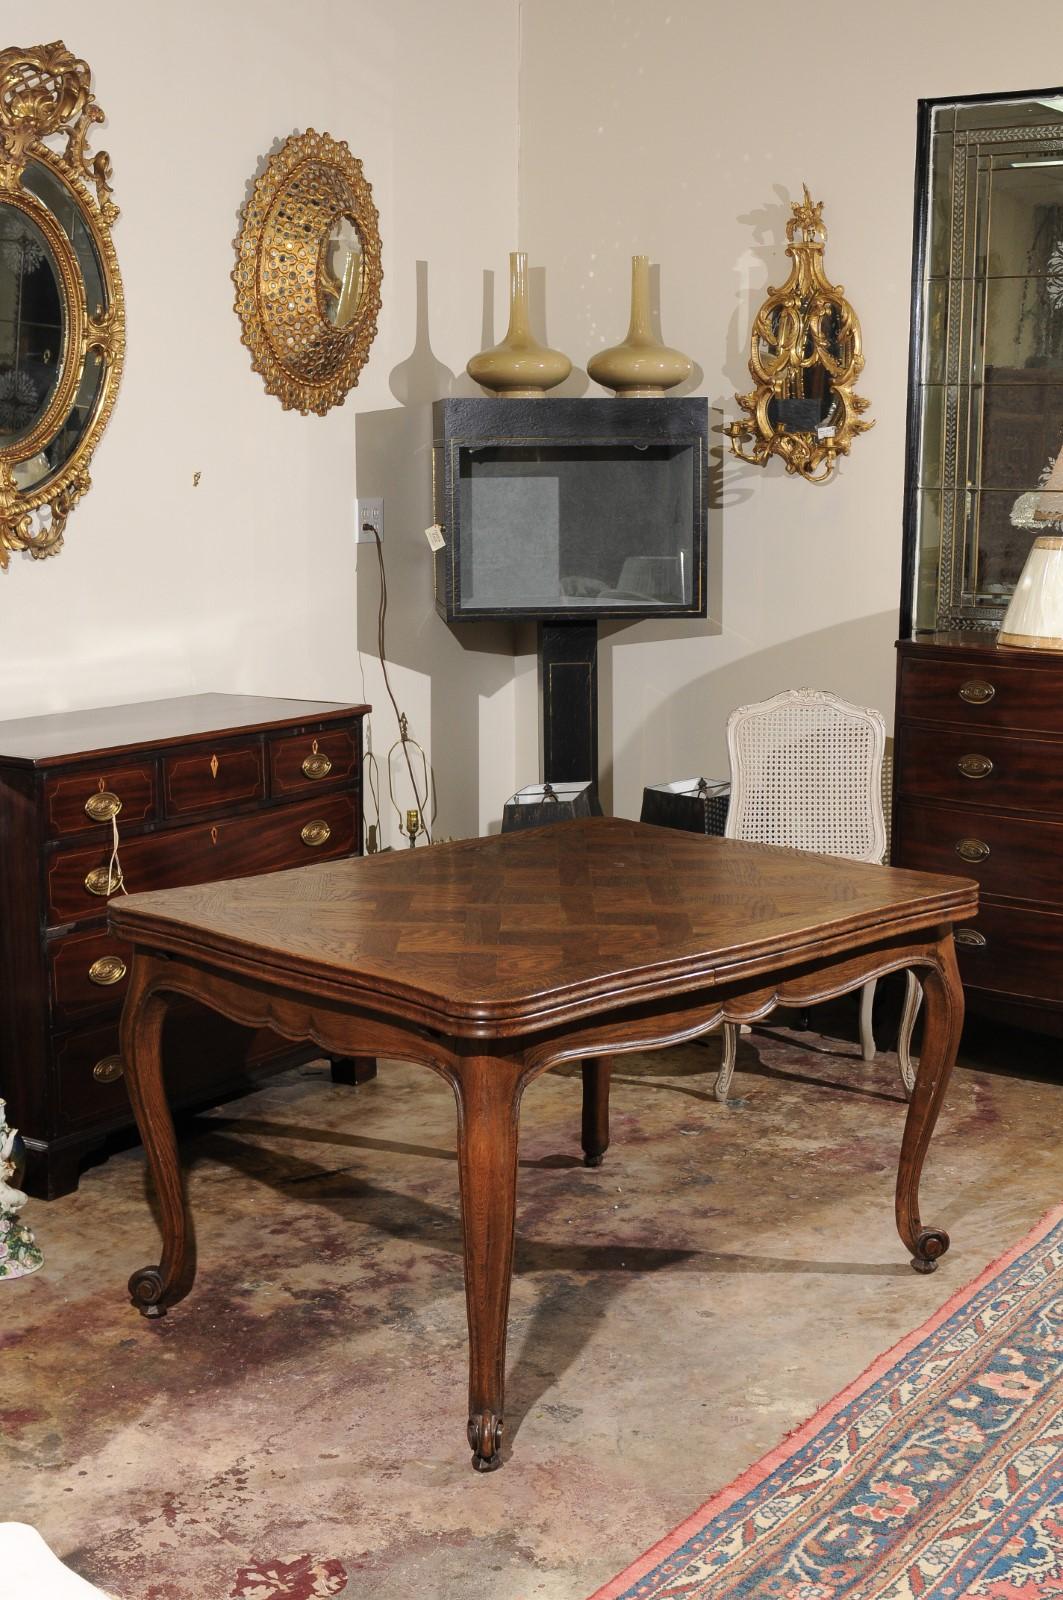 A beautiful French extendable dining table with a lovely parquetry top, scalloped apron and cabriole legs. The 2 leaves are 20 inches each making the overall length 91 inches
Without the leaves the table is 51 inches long.